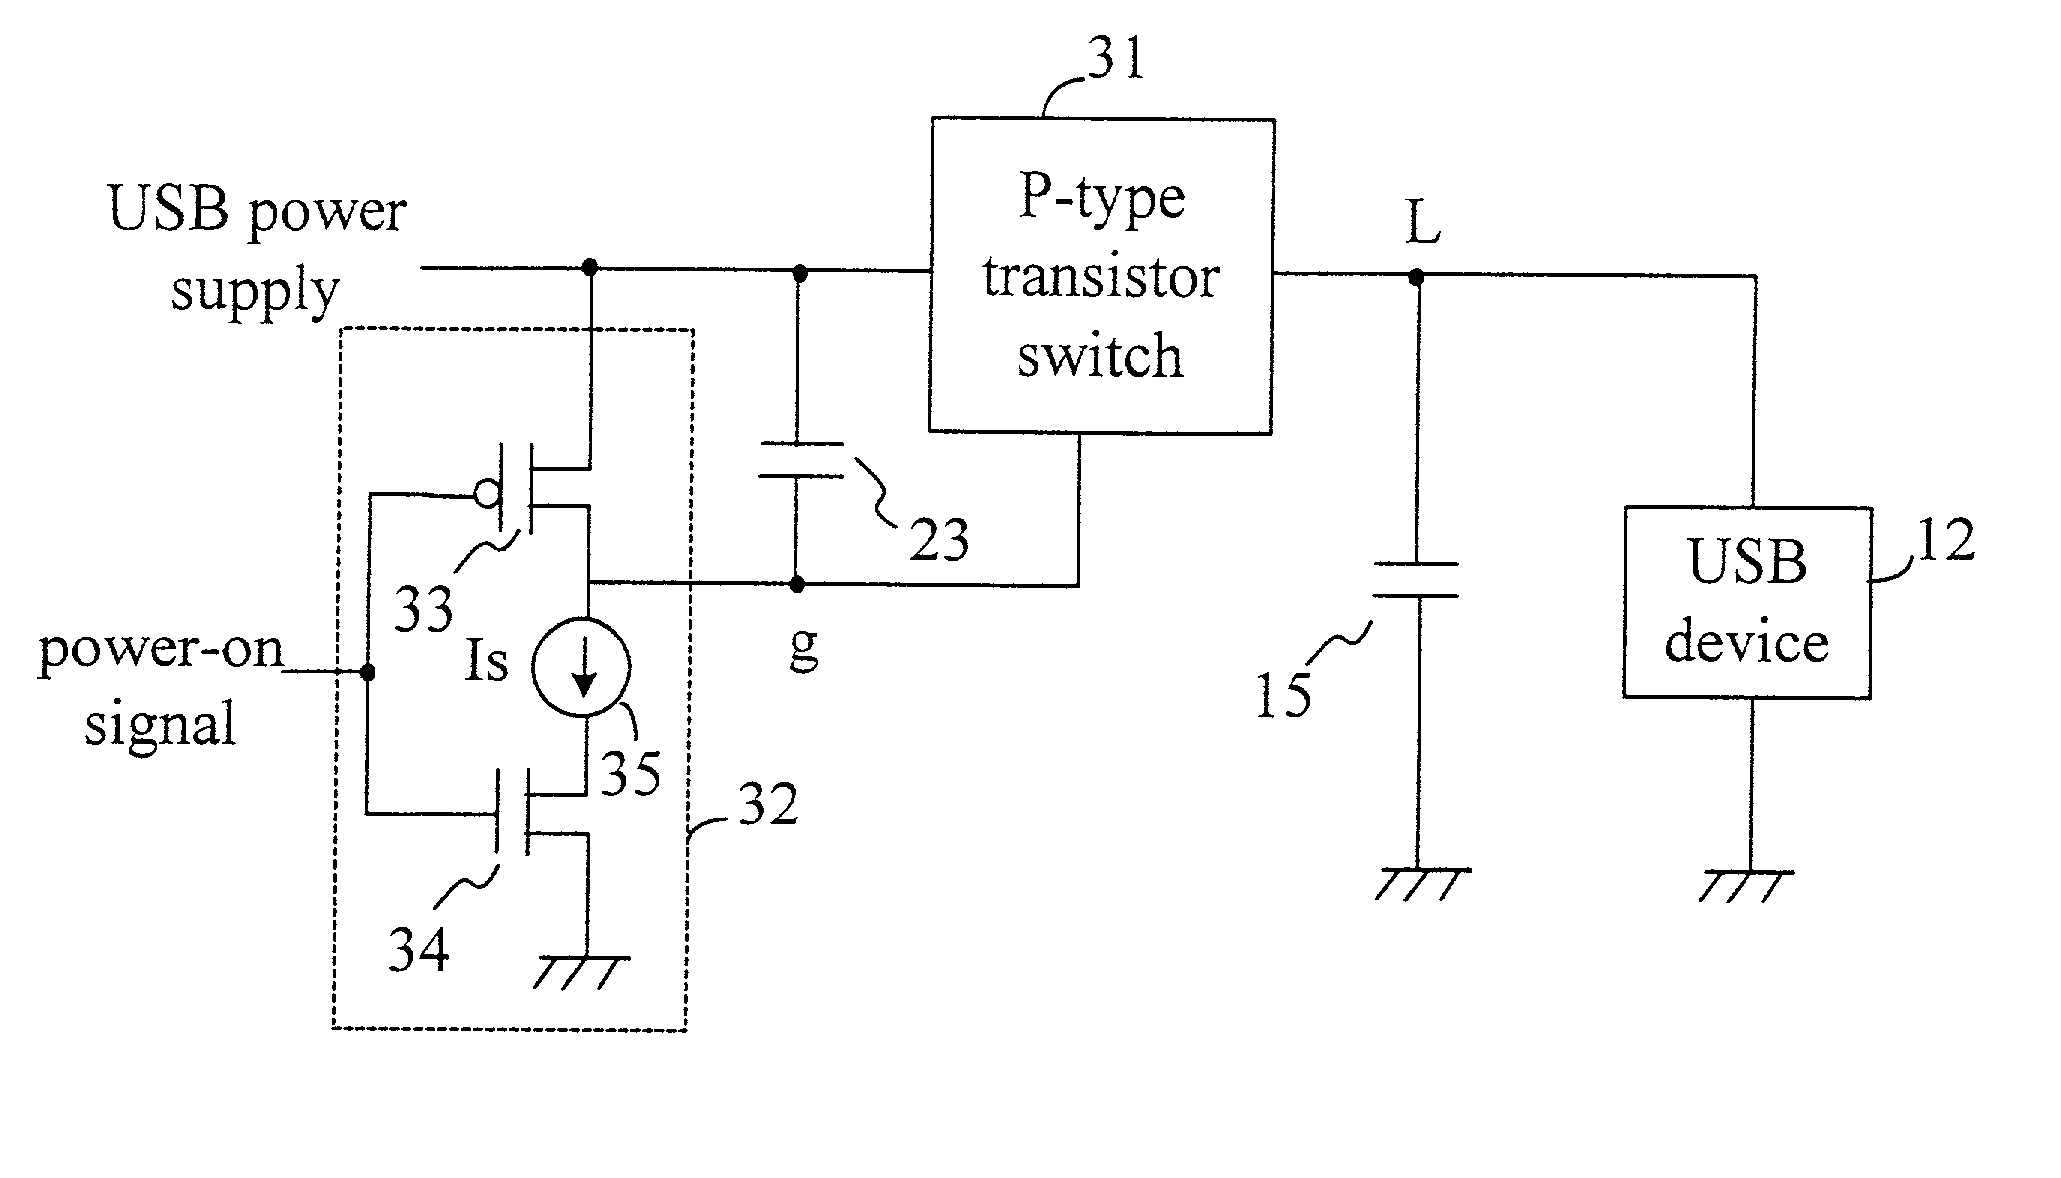 Power-on circuit of a peripheral component